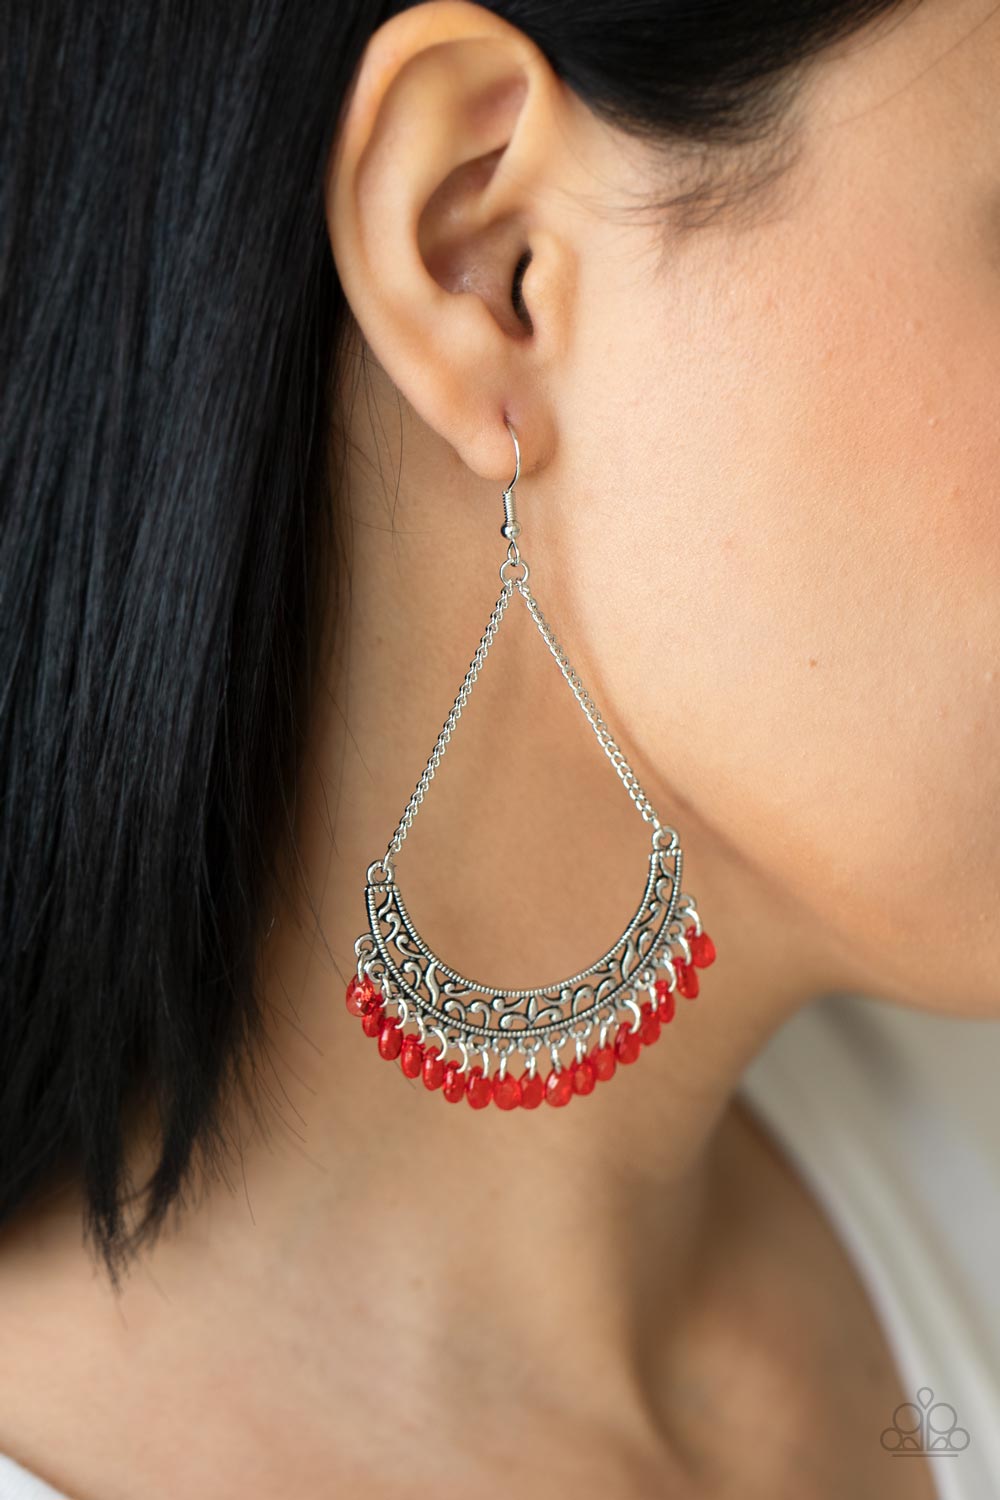 Orchard Odyssey Red Earring - Paparazzi Accessories Item #P5ST-RDXX-017XX Suspended by two silver chains, a half moon silver frame filled with vine-like filigree gives way to a dainty fringe of glassy red teardrop beads for an enchanting fashion. Earring attaches to a standard fishhook fitting.  Sold as one pair of earrings.